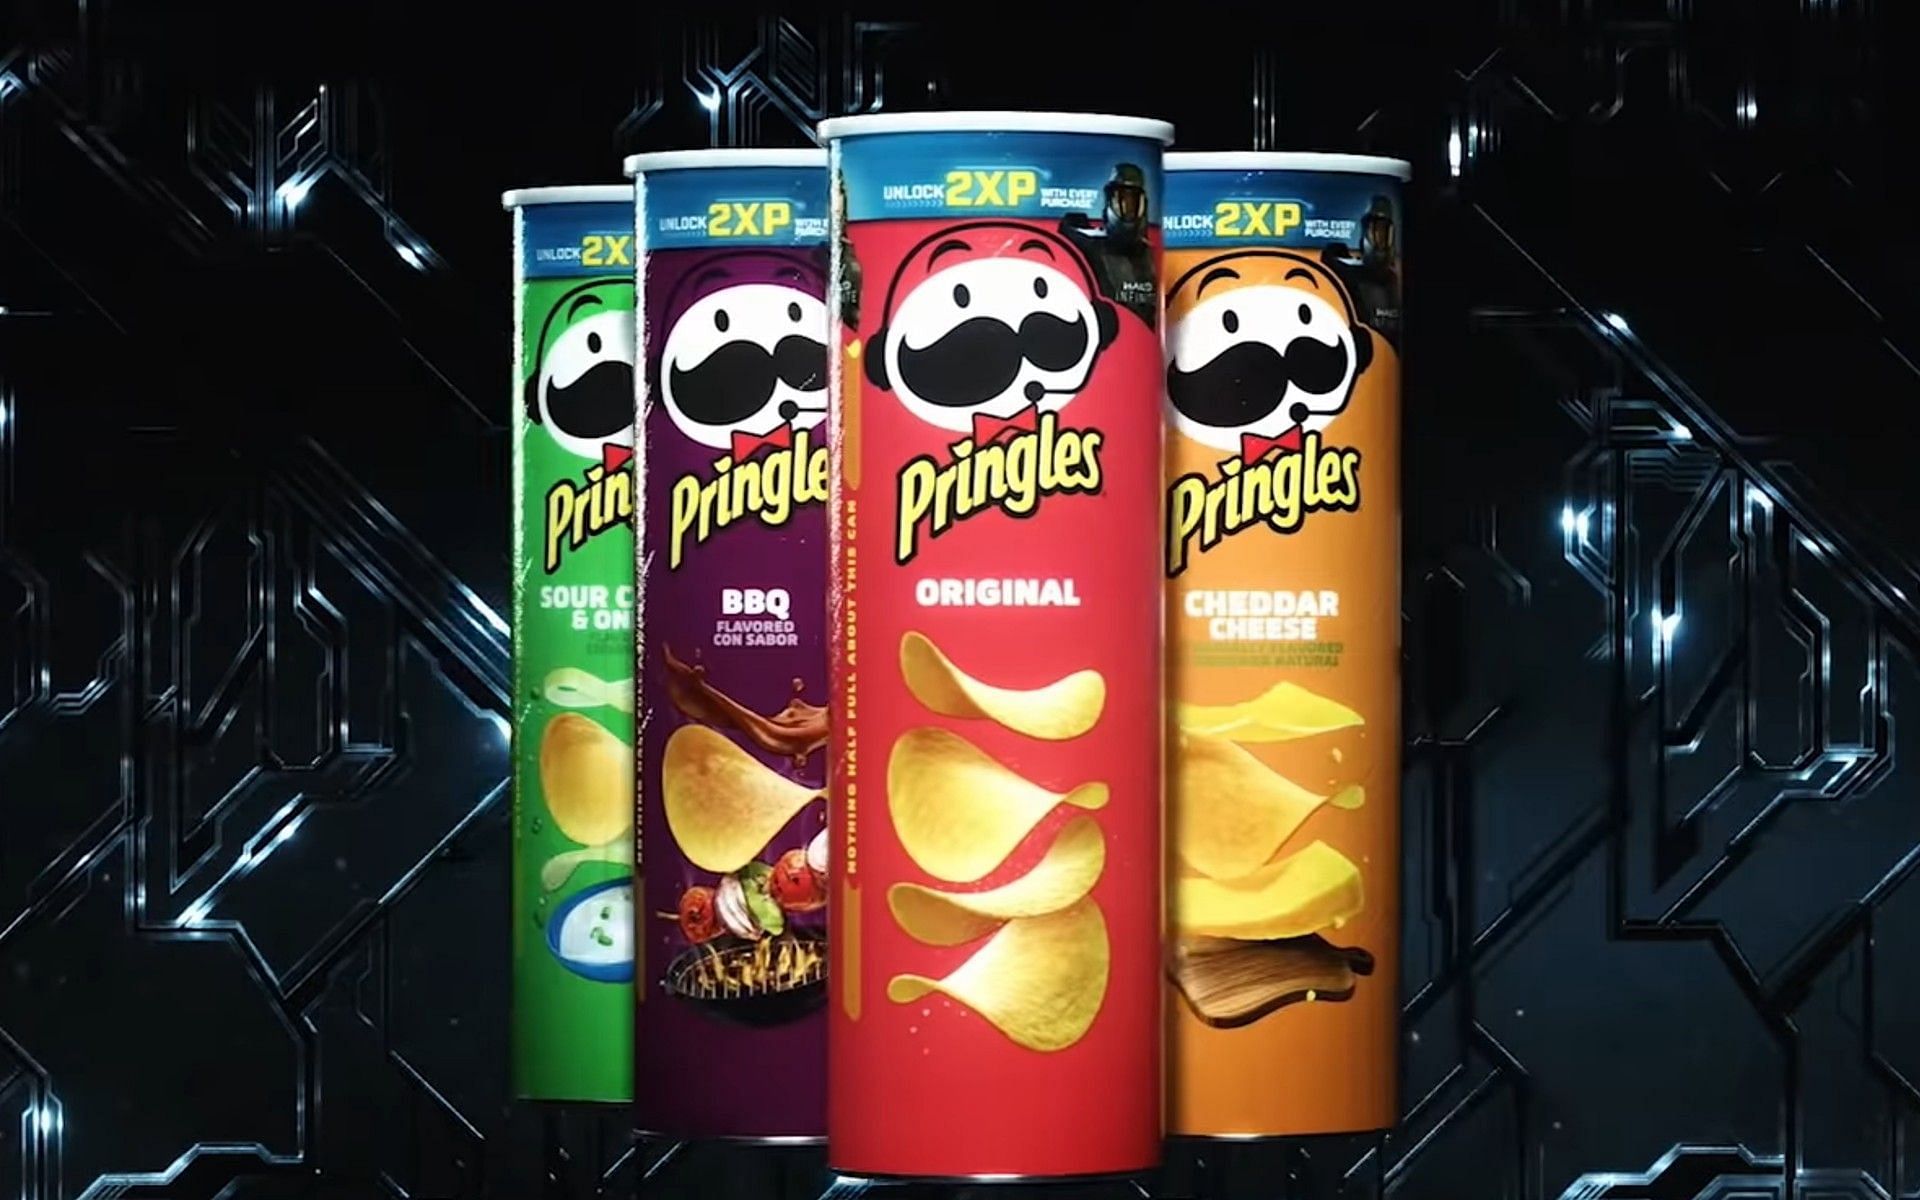 What are the Pringles rewards for Halo Infinite?